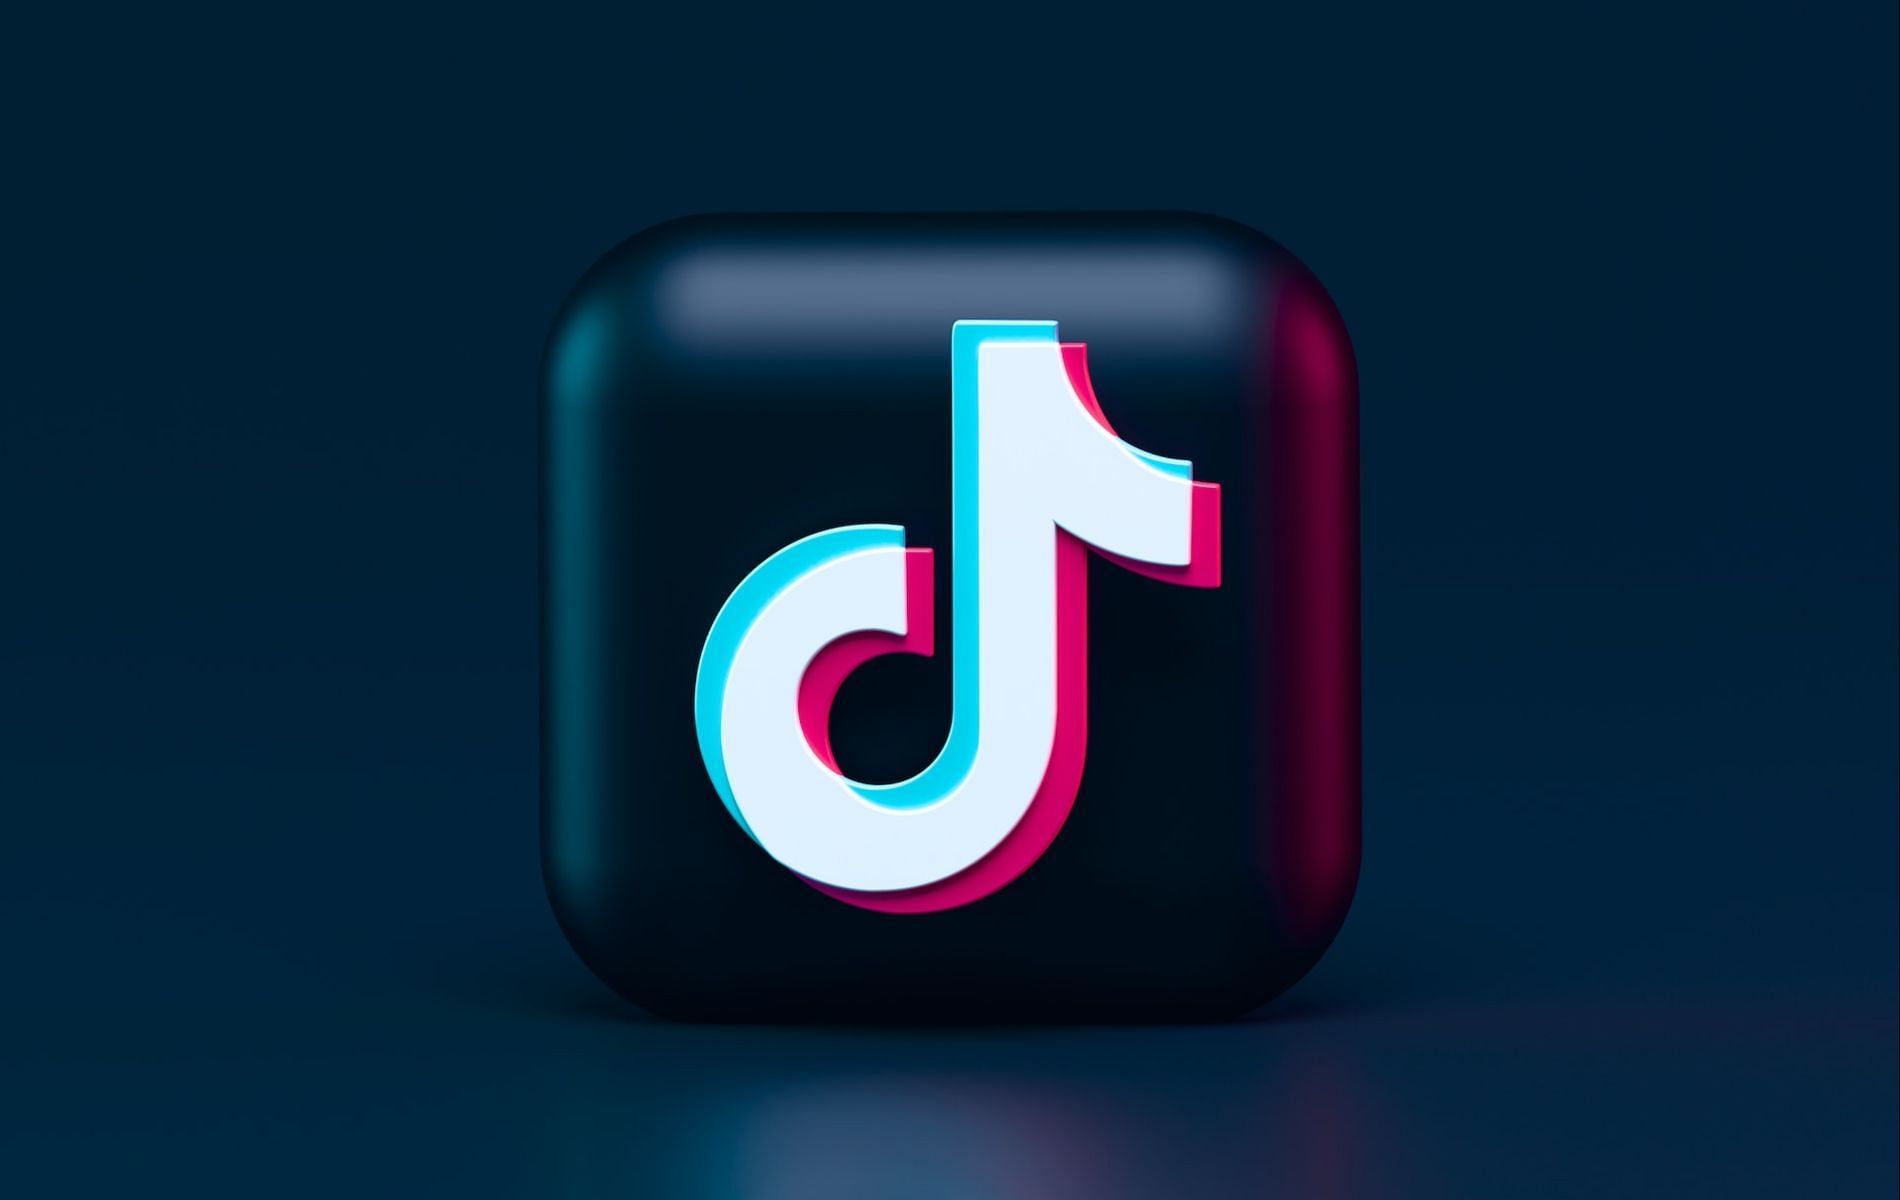 how to get wallpaper on roblox ipad｜TikTok Search